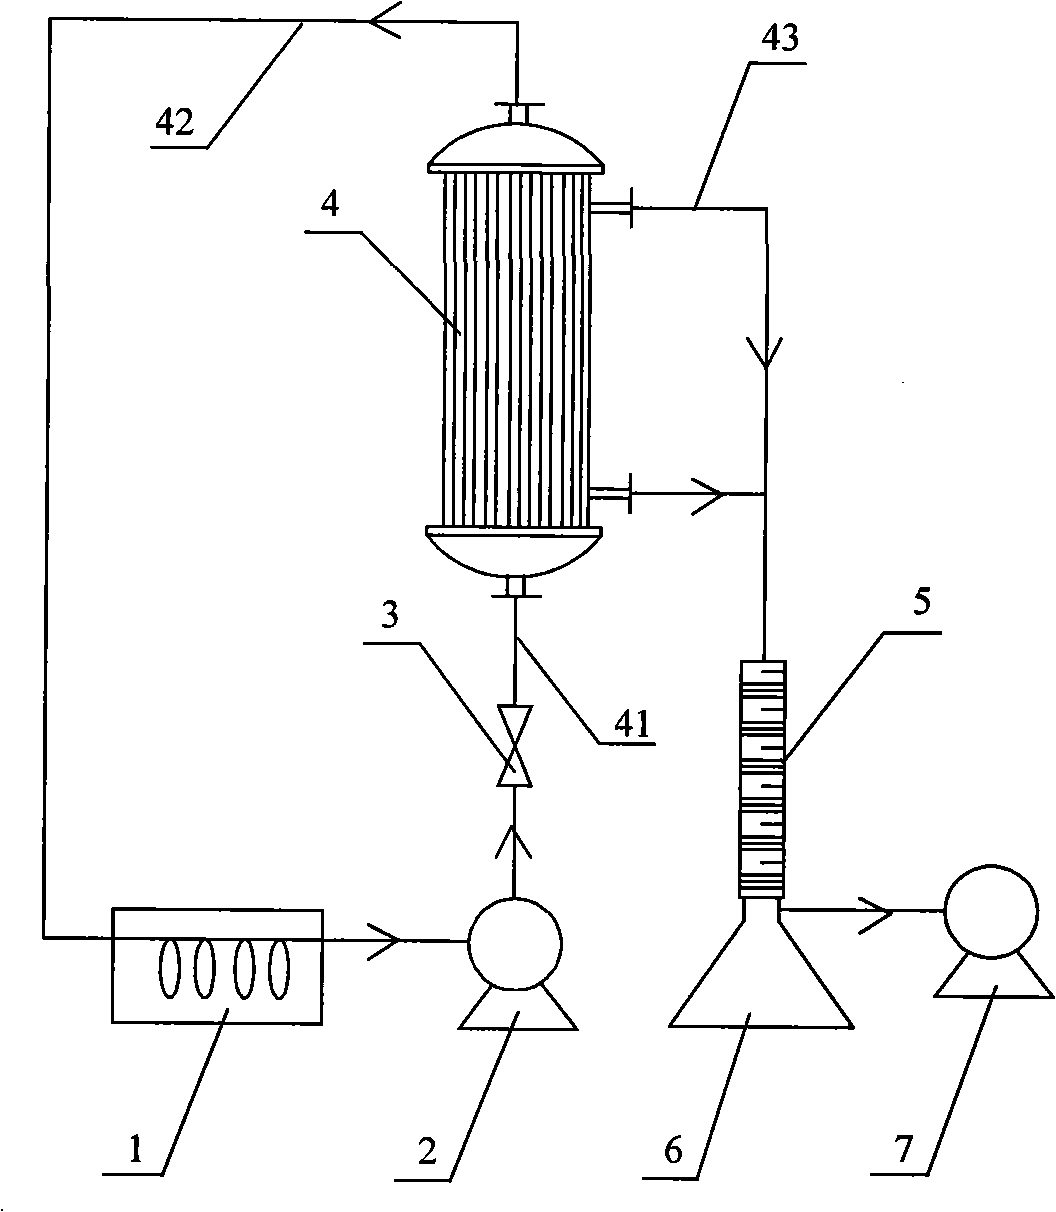 Concentration method for sugar liquid in cellulose alcoholic fermentation